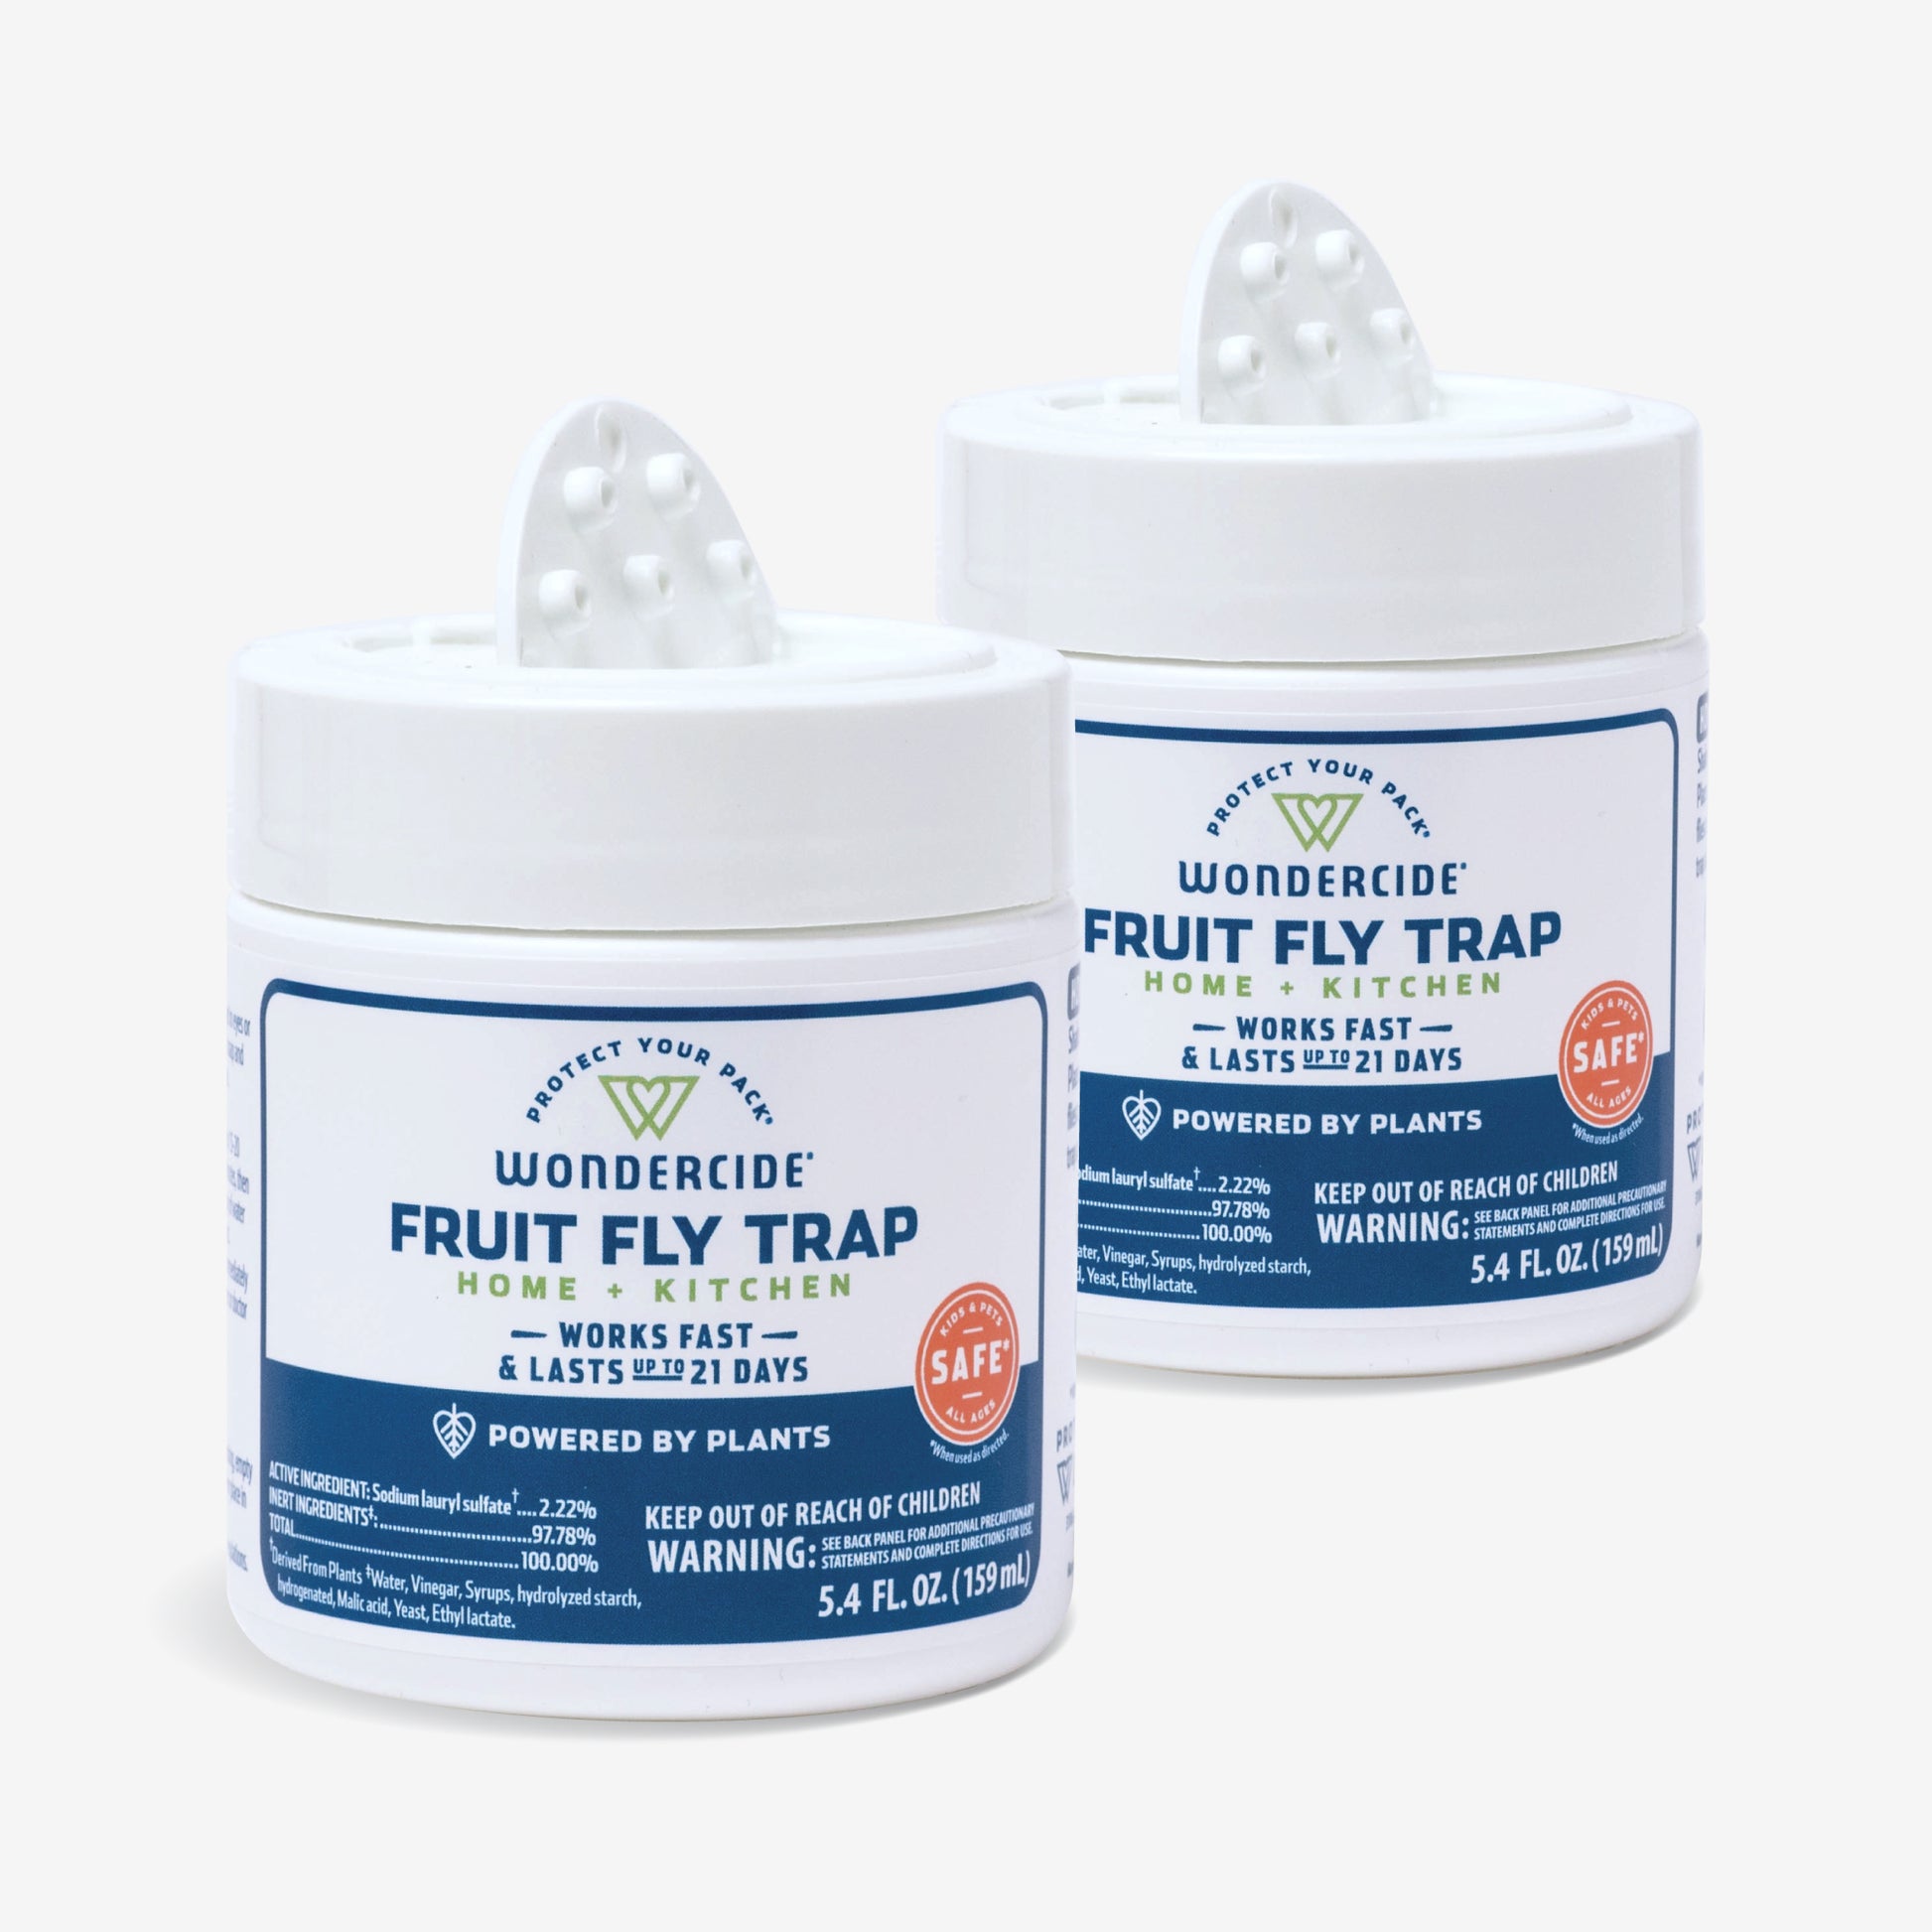 GREENSTRIKE 2-Pack Fruit Fly Traps for Indoors use. 120 Days Solution –  Gnat Trap and Effective Fruit Fly Trap – Easy to Use – Best for Kitchen –